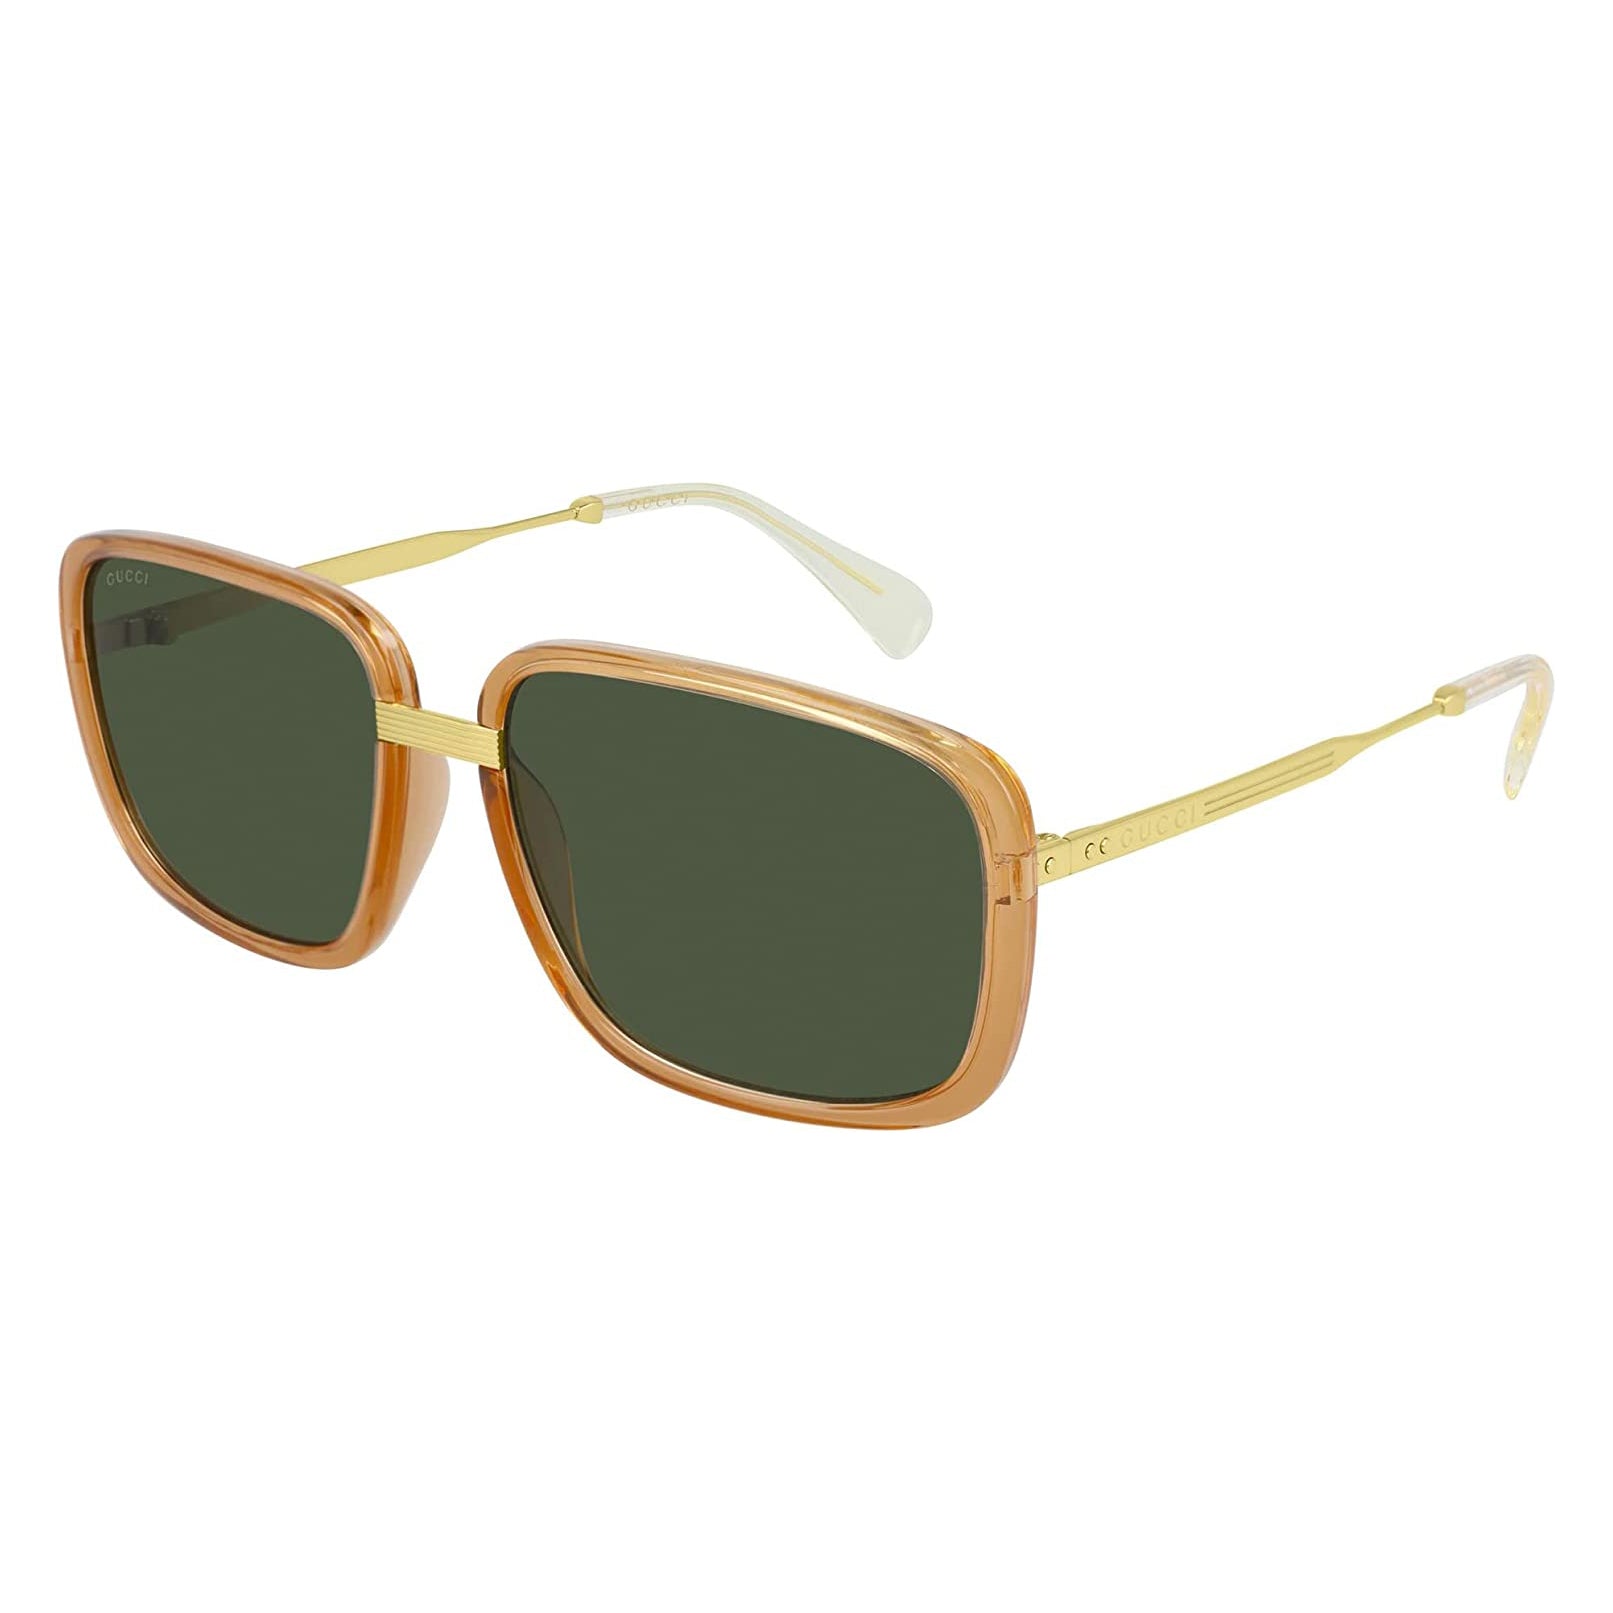 Gucci Unisex Sunglasses Rectangle Brown Gold GG0787S-003 61